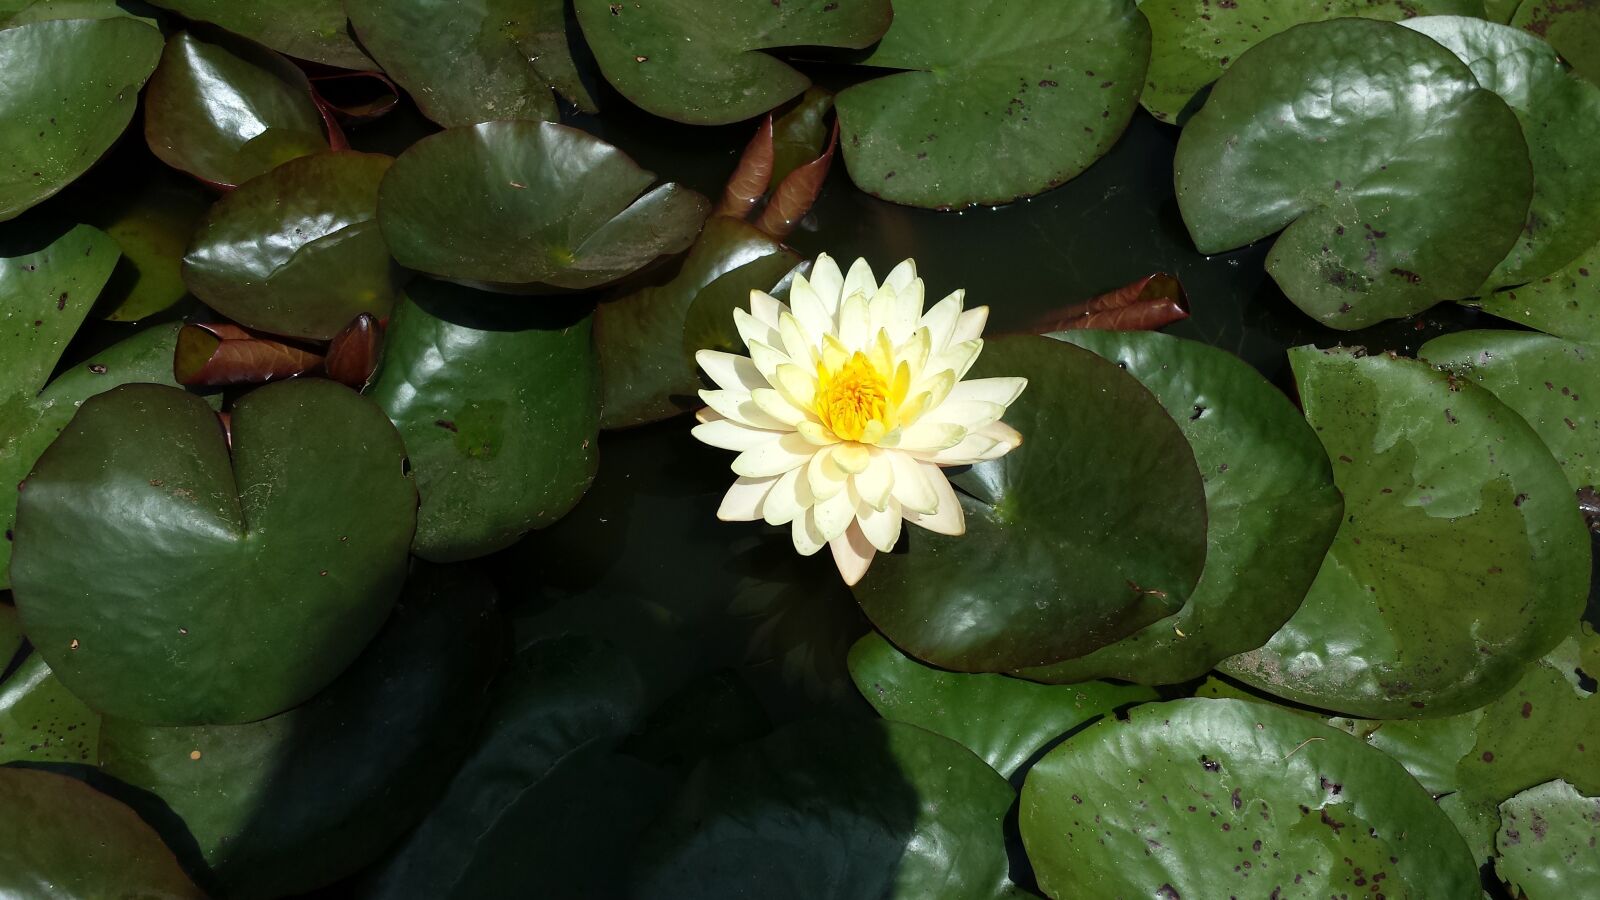 Samsung Galaxy S4 sample photo. Water lily, leaves, green photography